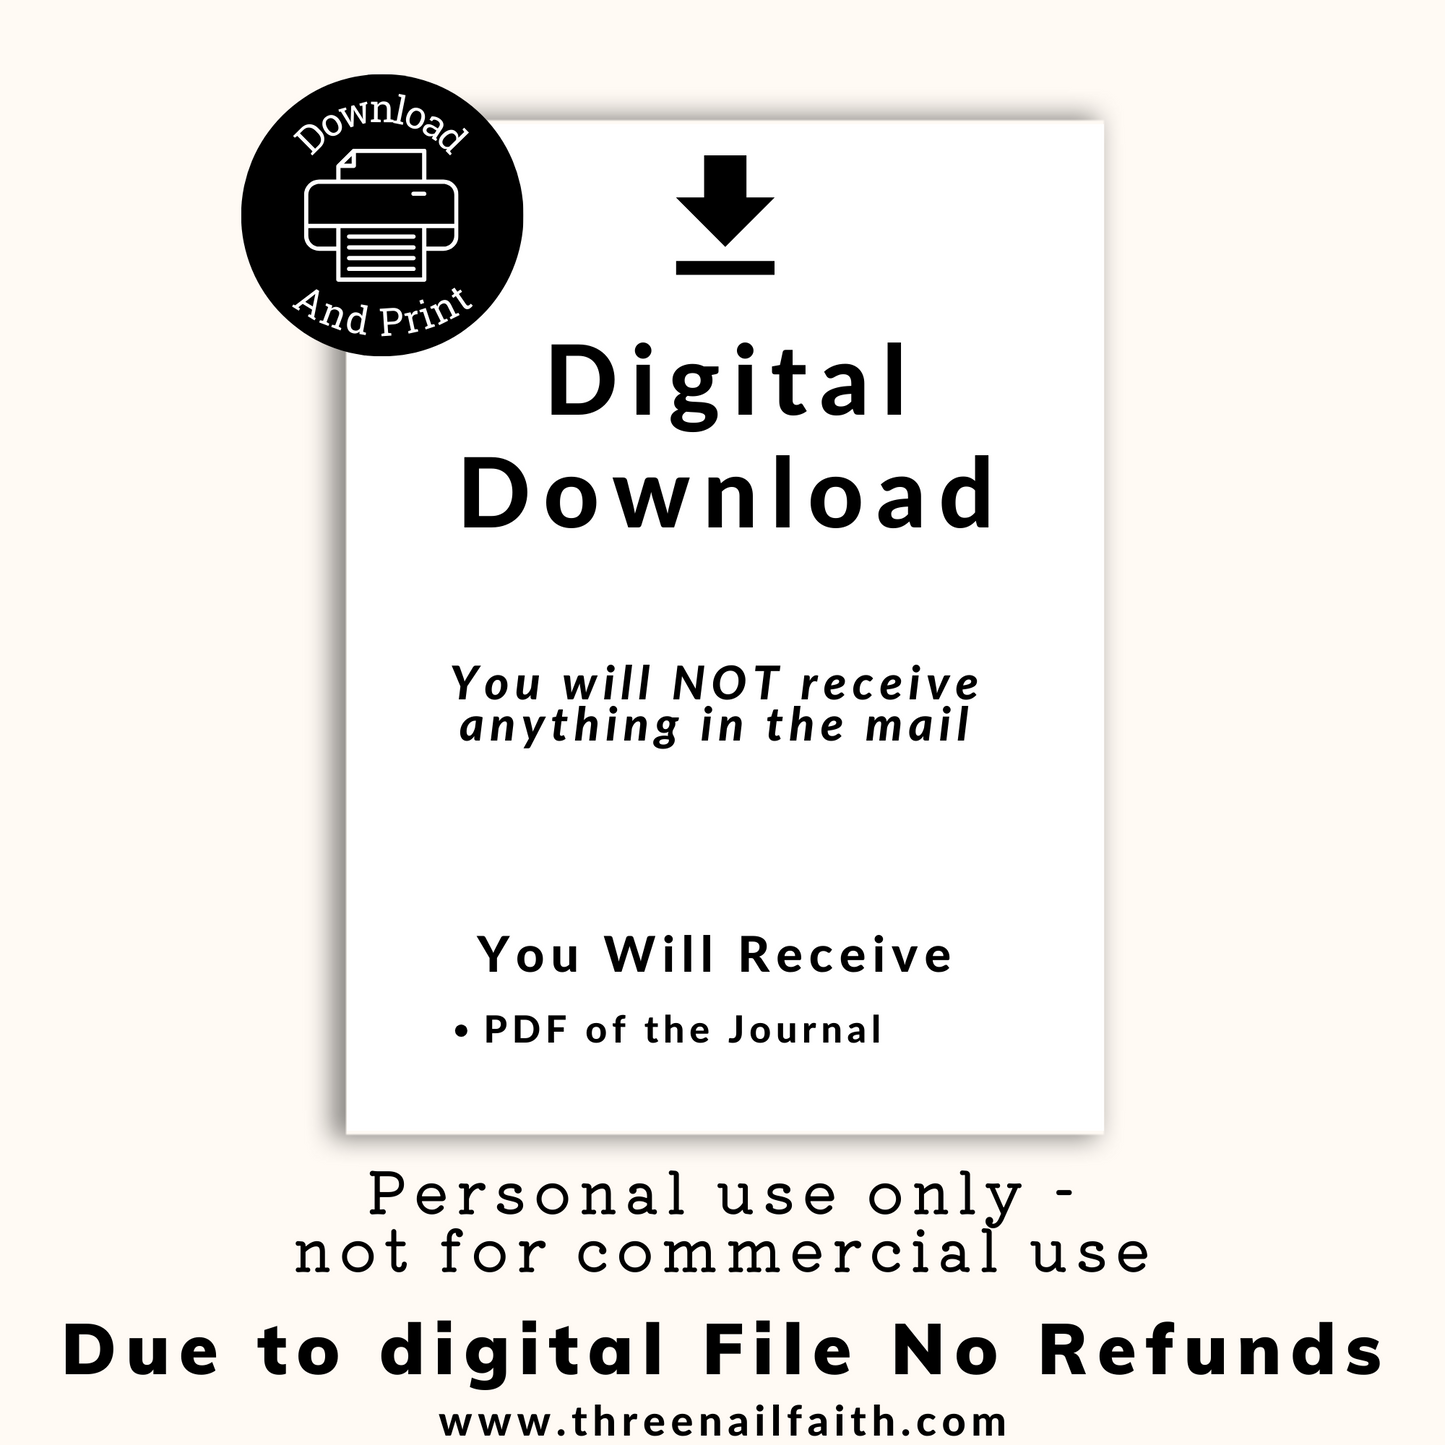 This is a digital download nothing will be shipped to you.